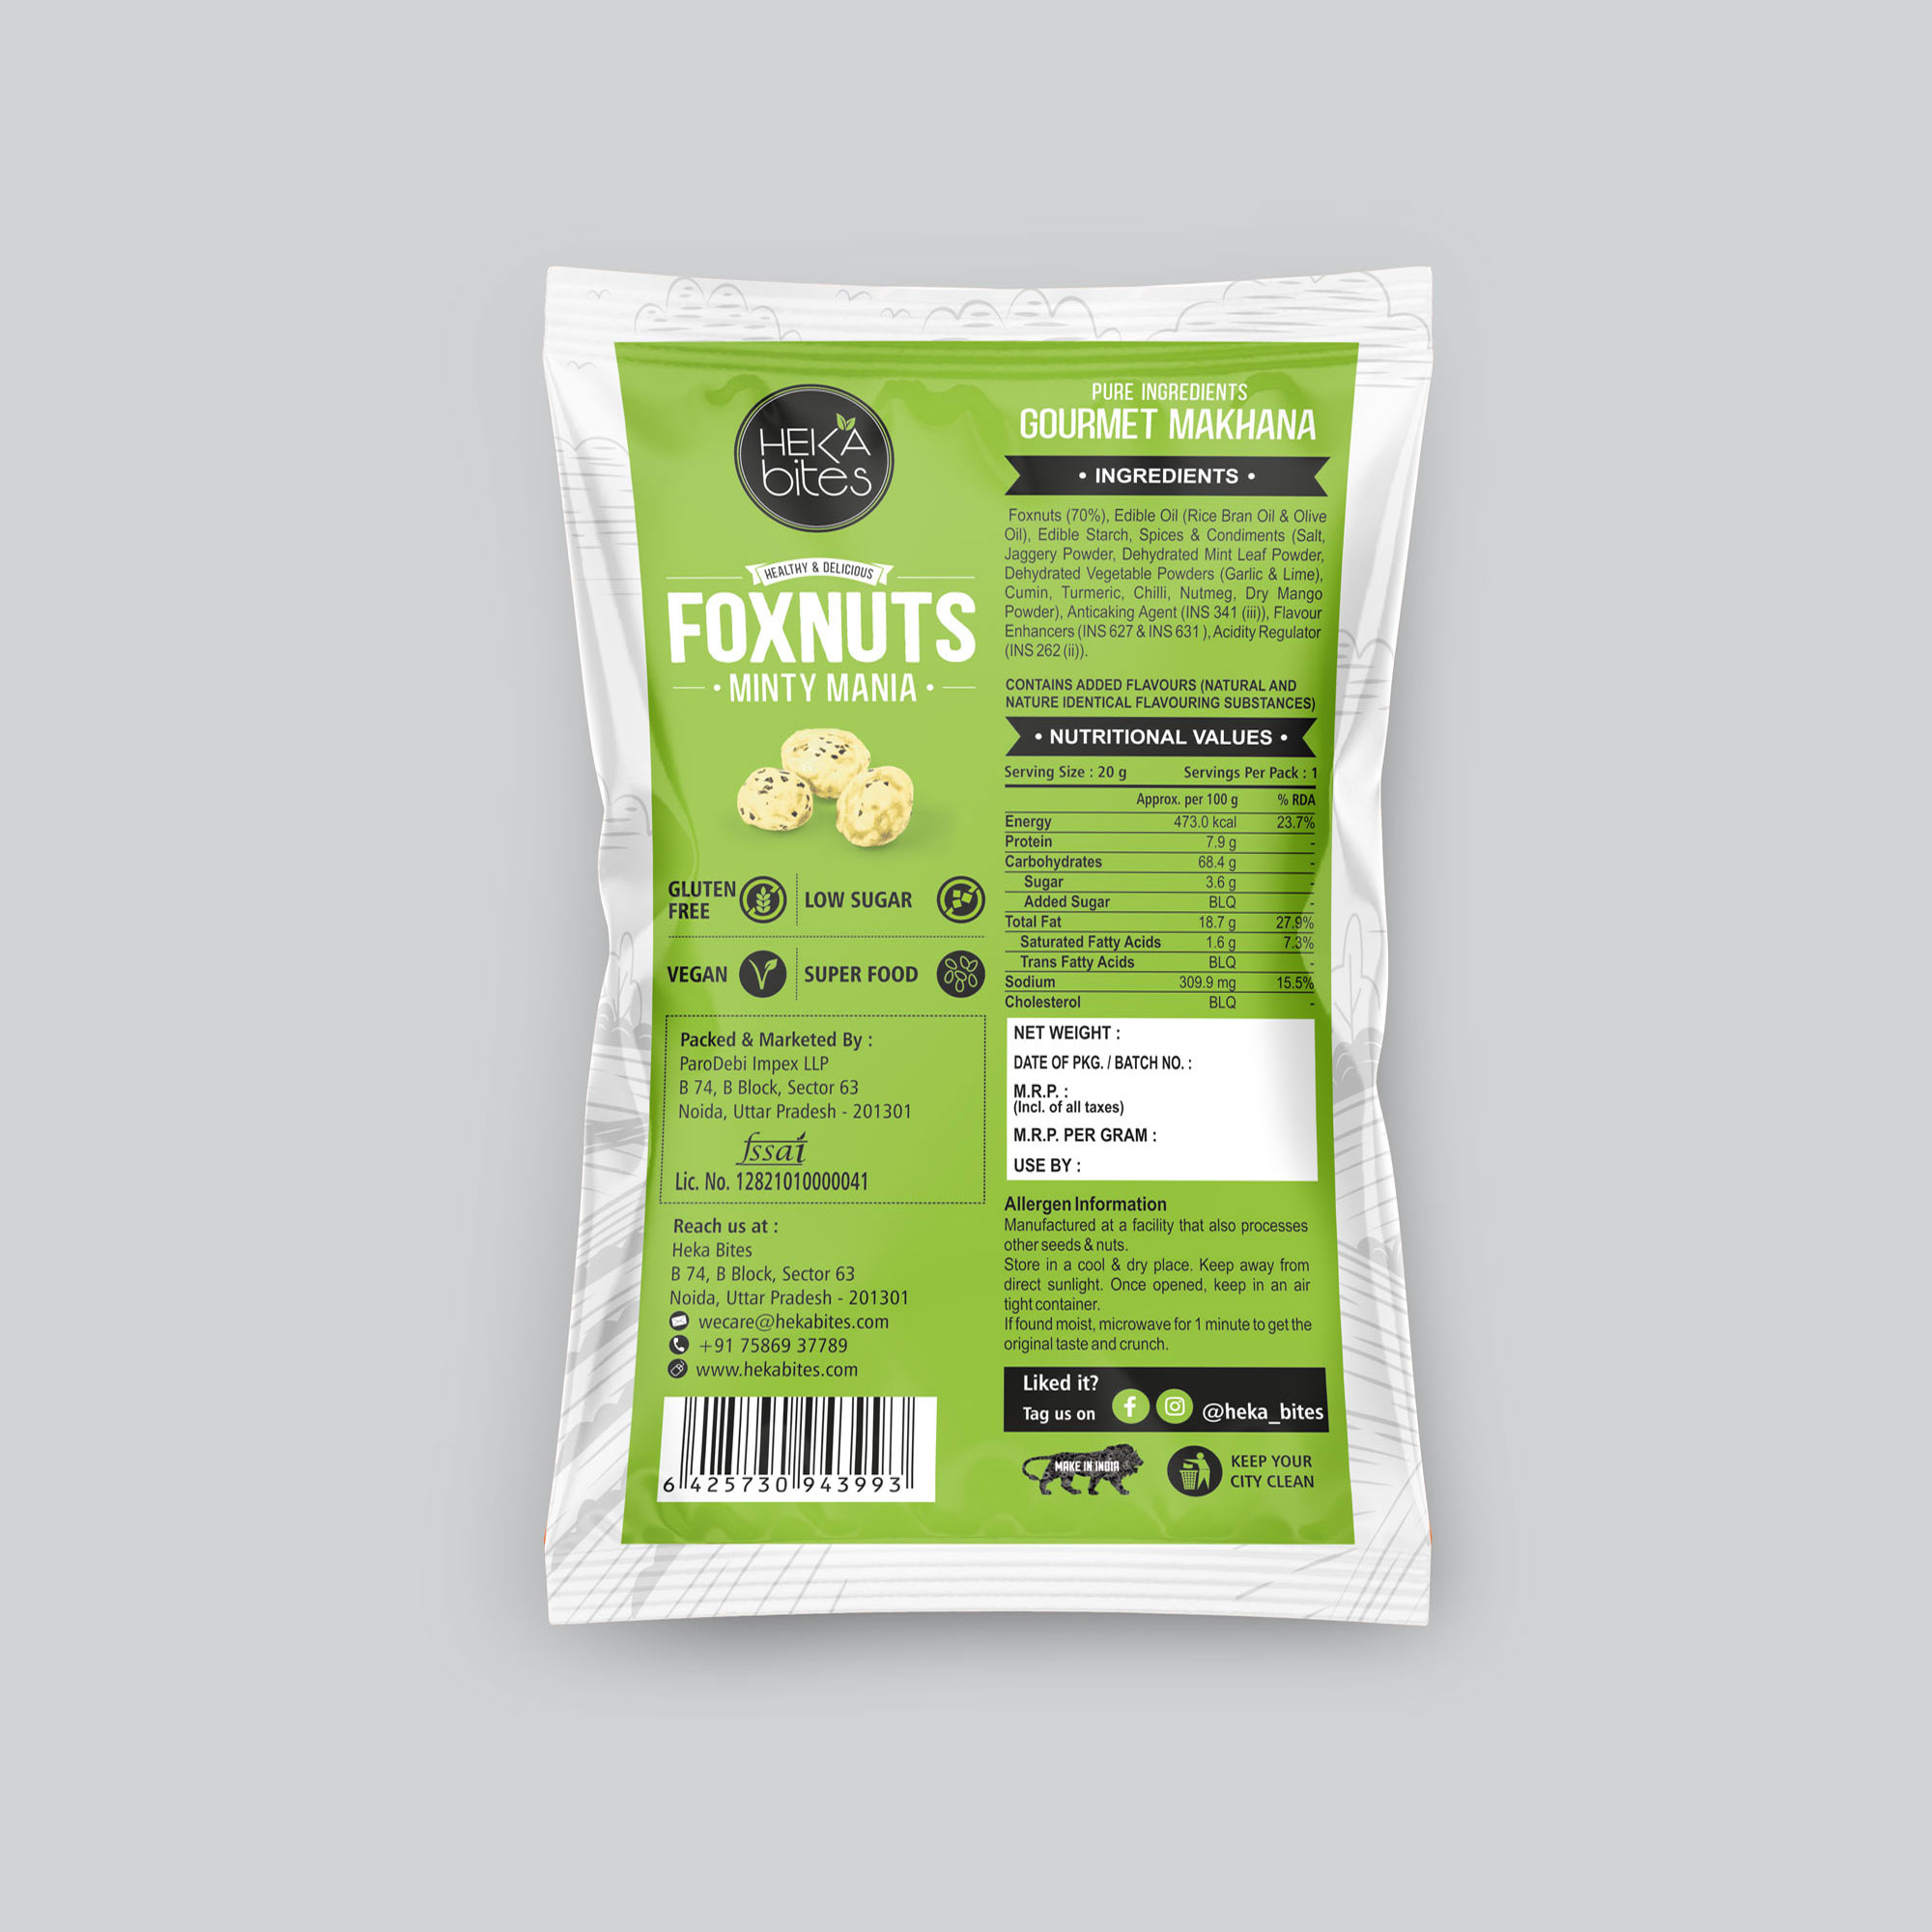 Heka Bites Fox Nuts Minty mania 50g (pack of 5)